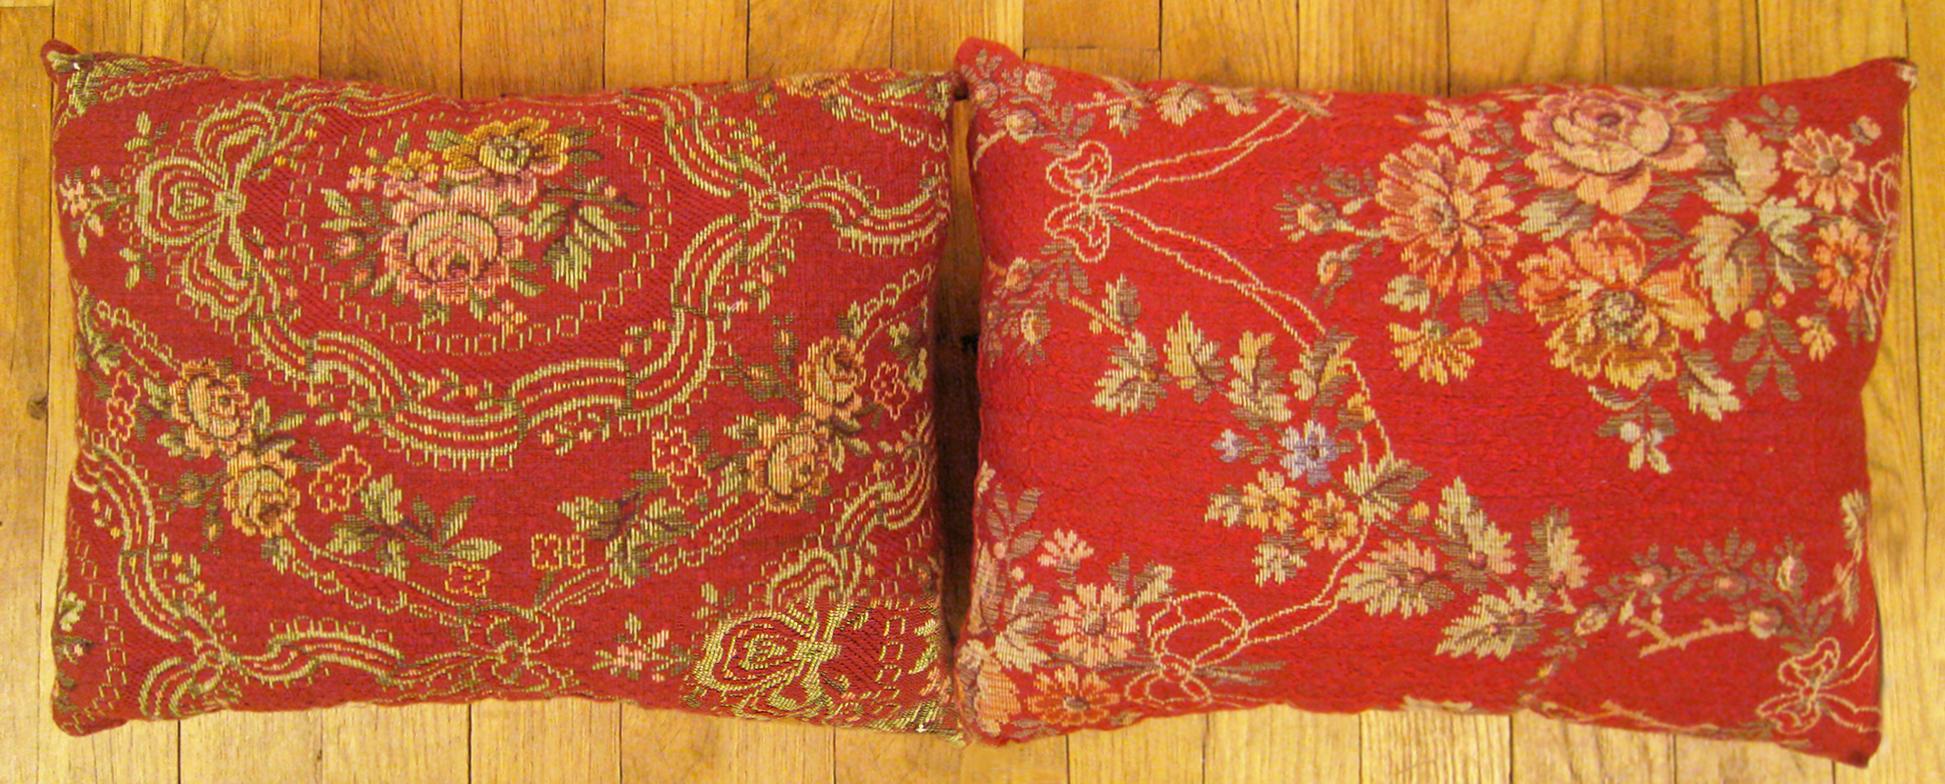 A Pair of Antique Jacquard Tapestry Pillows ; size 1'0” x 1'3” Each.

An antique decorative pillows with floral elements allover a red central field, size 1'0